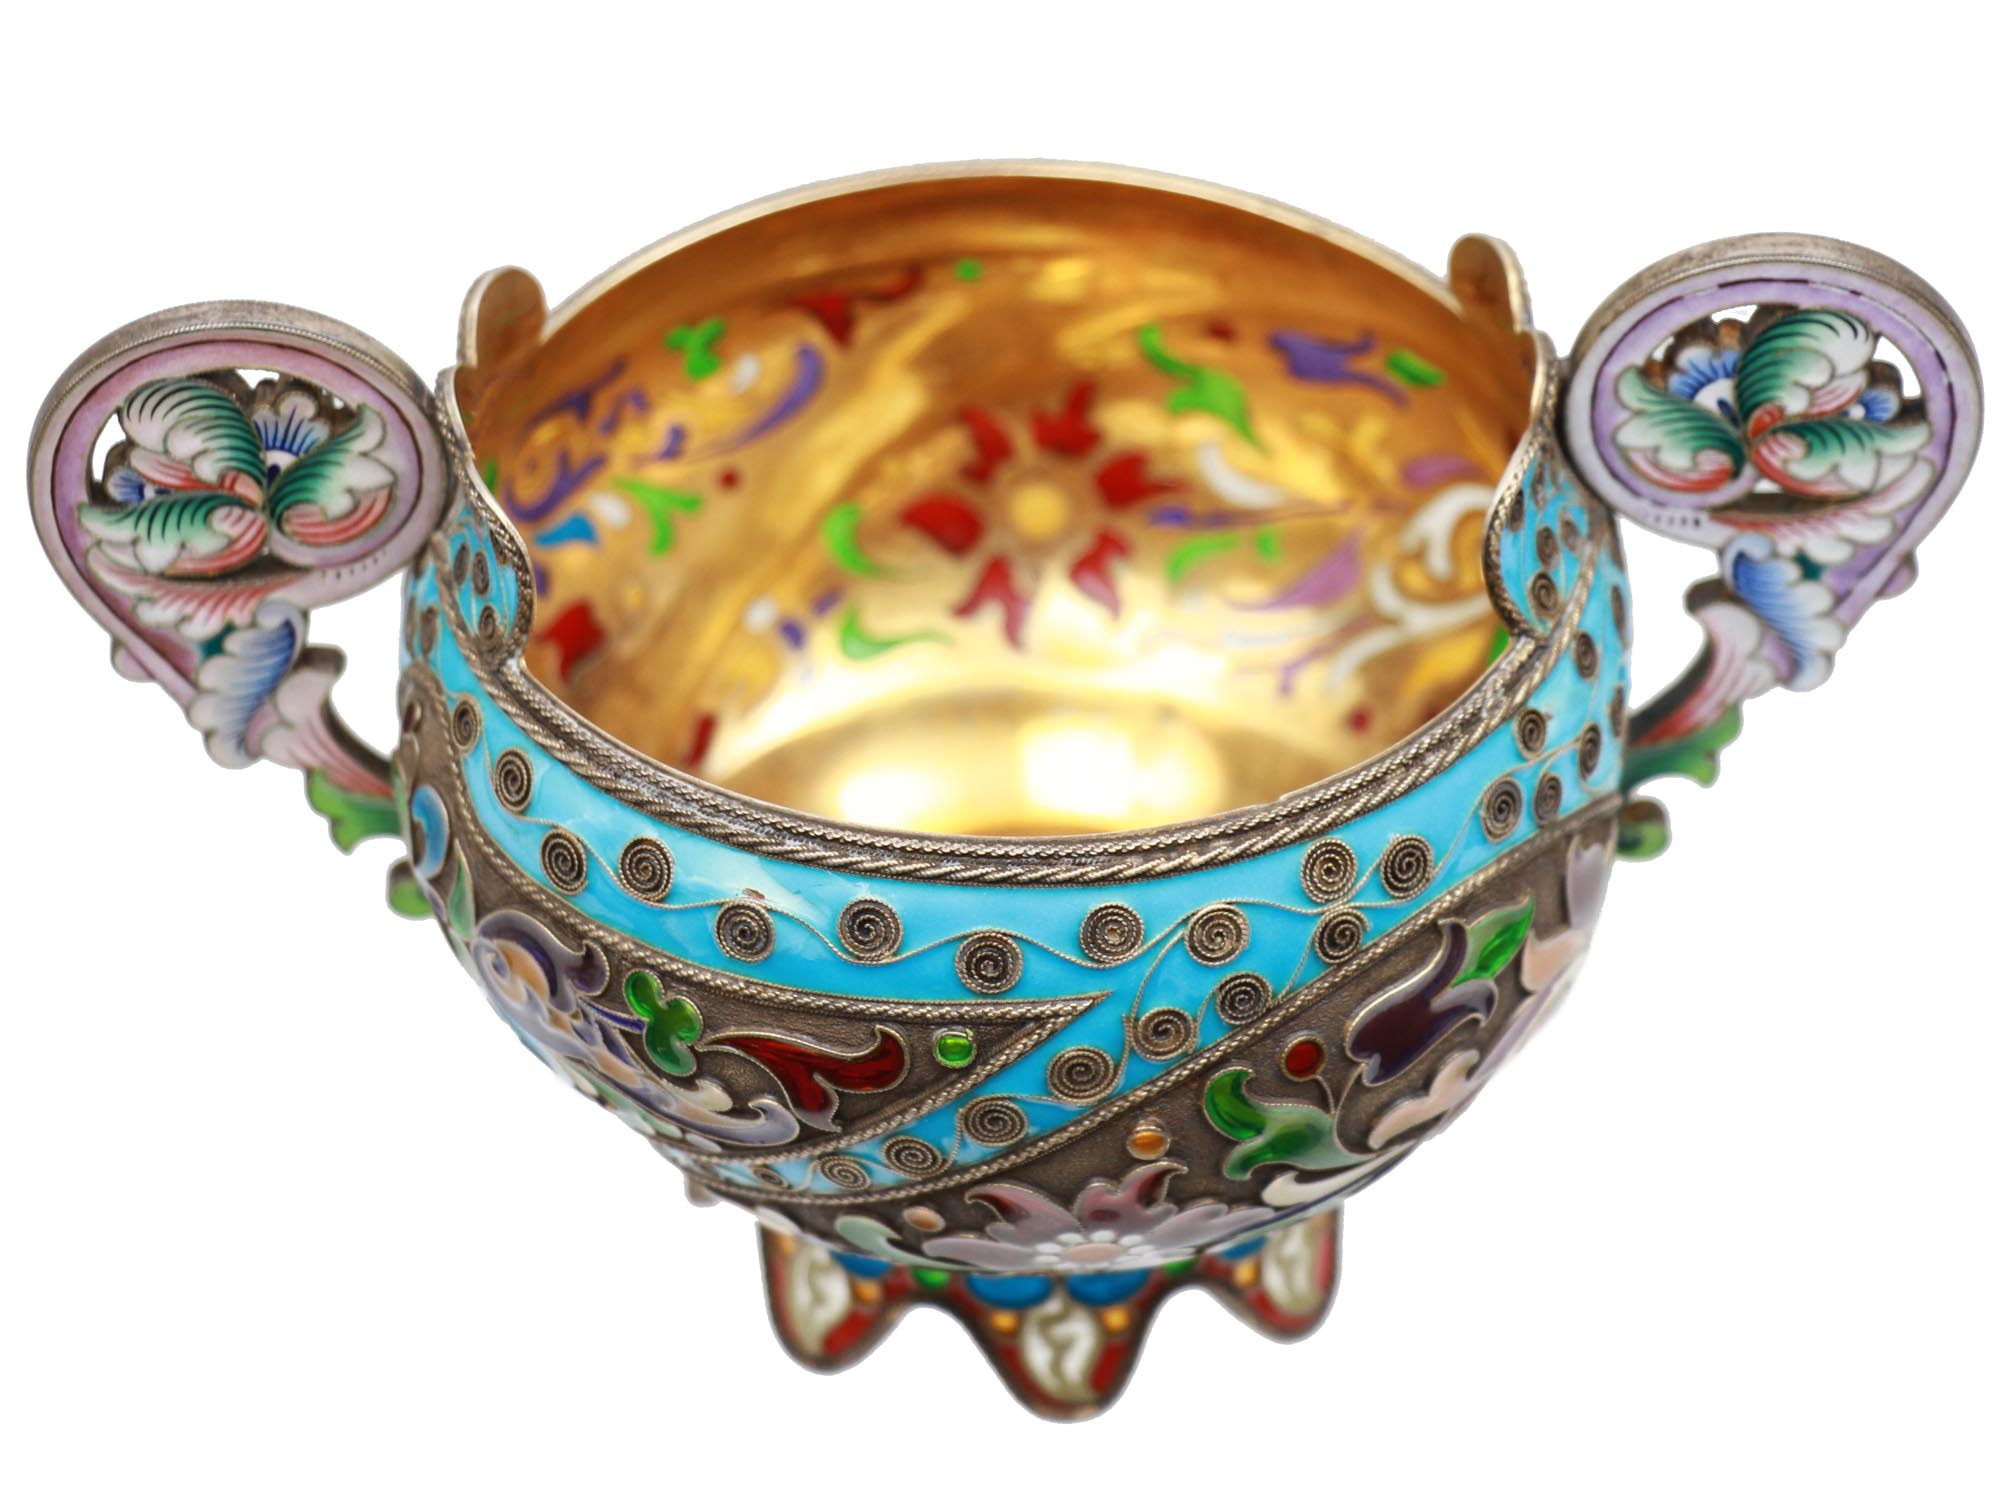 A RUSSIAN SILVER AND ENAMEL PLAQUE A JOUR BOWL PIC-4